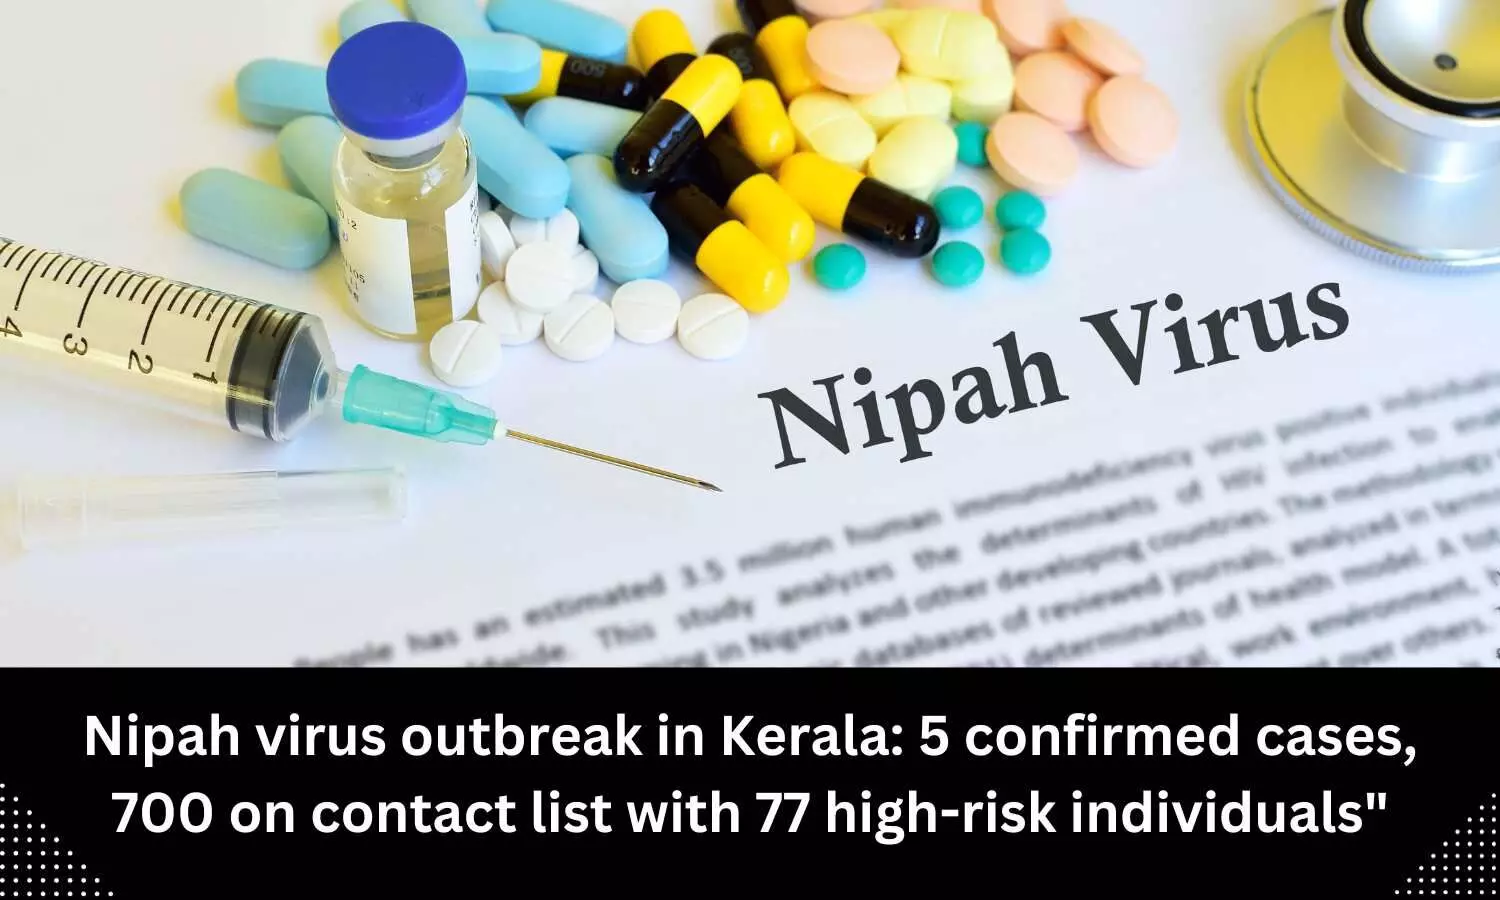 Outbreak of Nipah virus in Kerala: 5 confirmed cases, 700 on contact list with 77 high-risk individuals